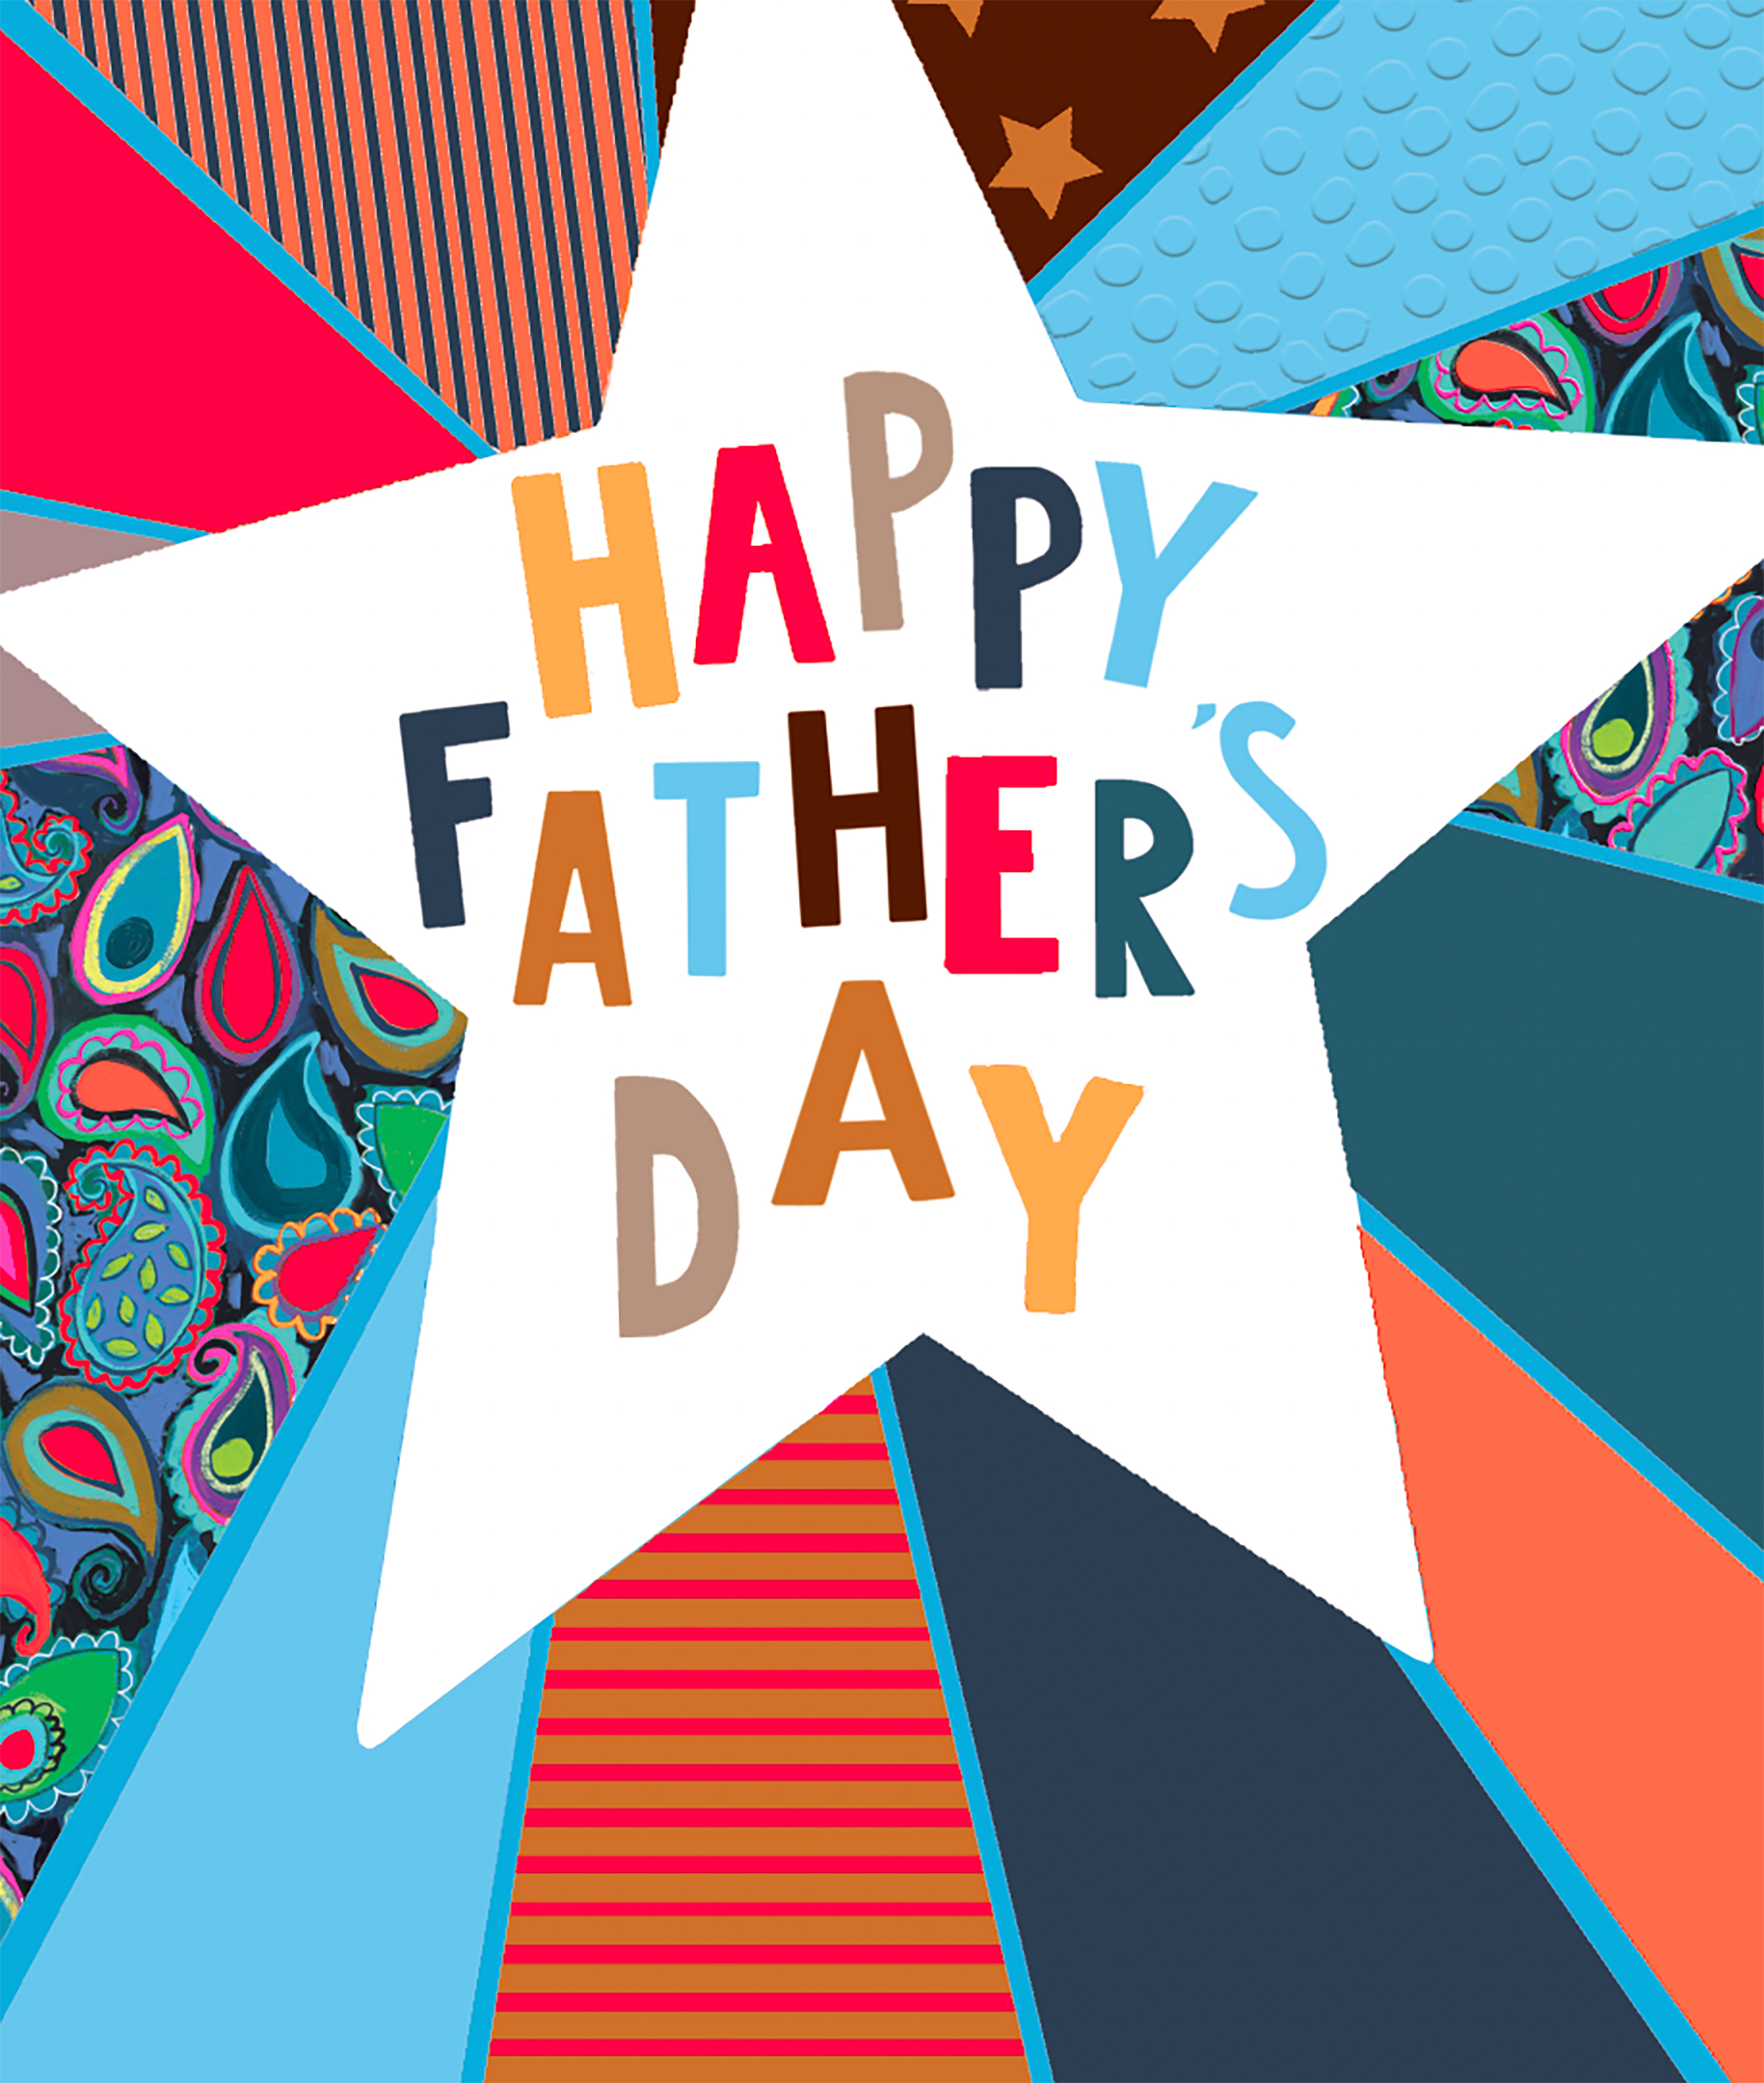 Paisley Starburst Happy Father's Day Card by penny black